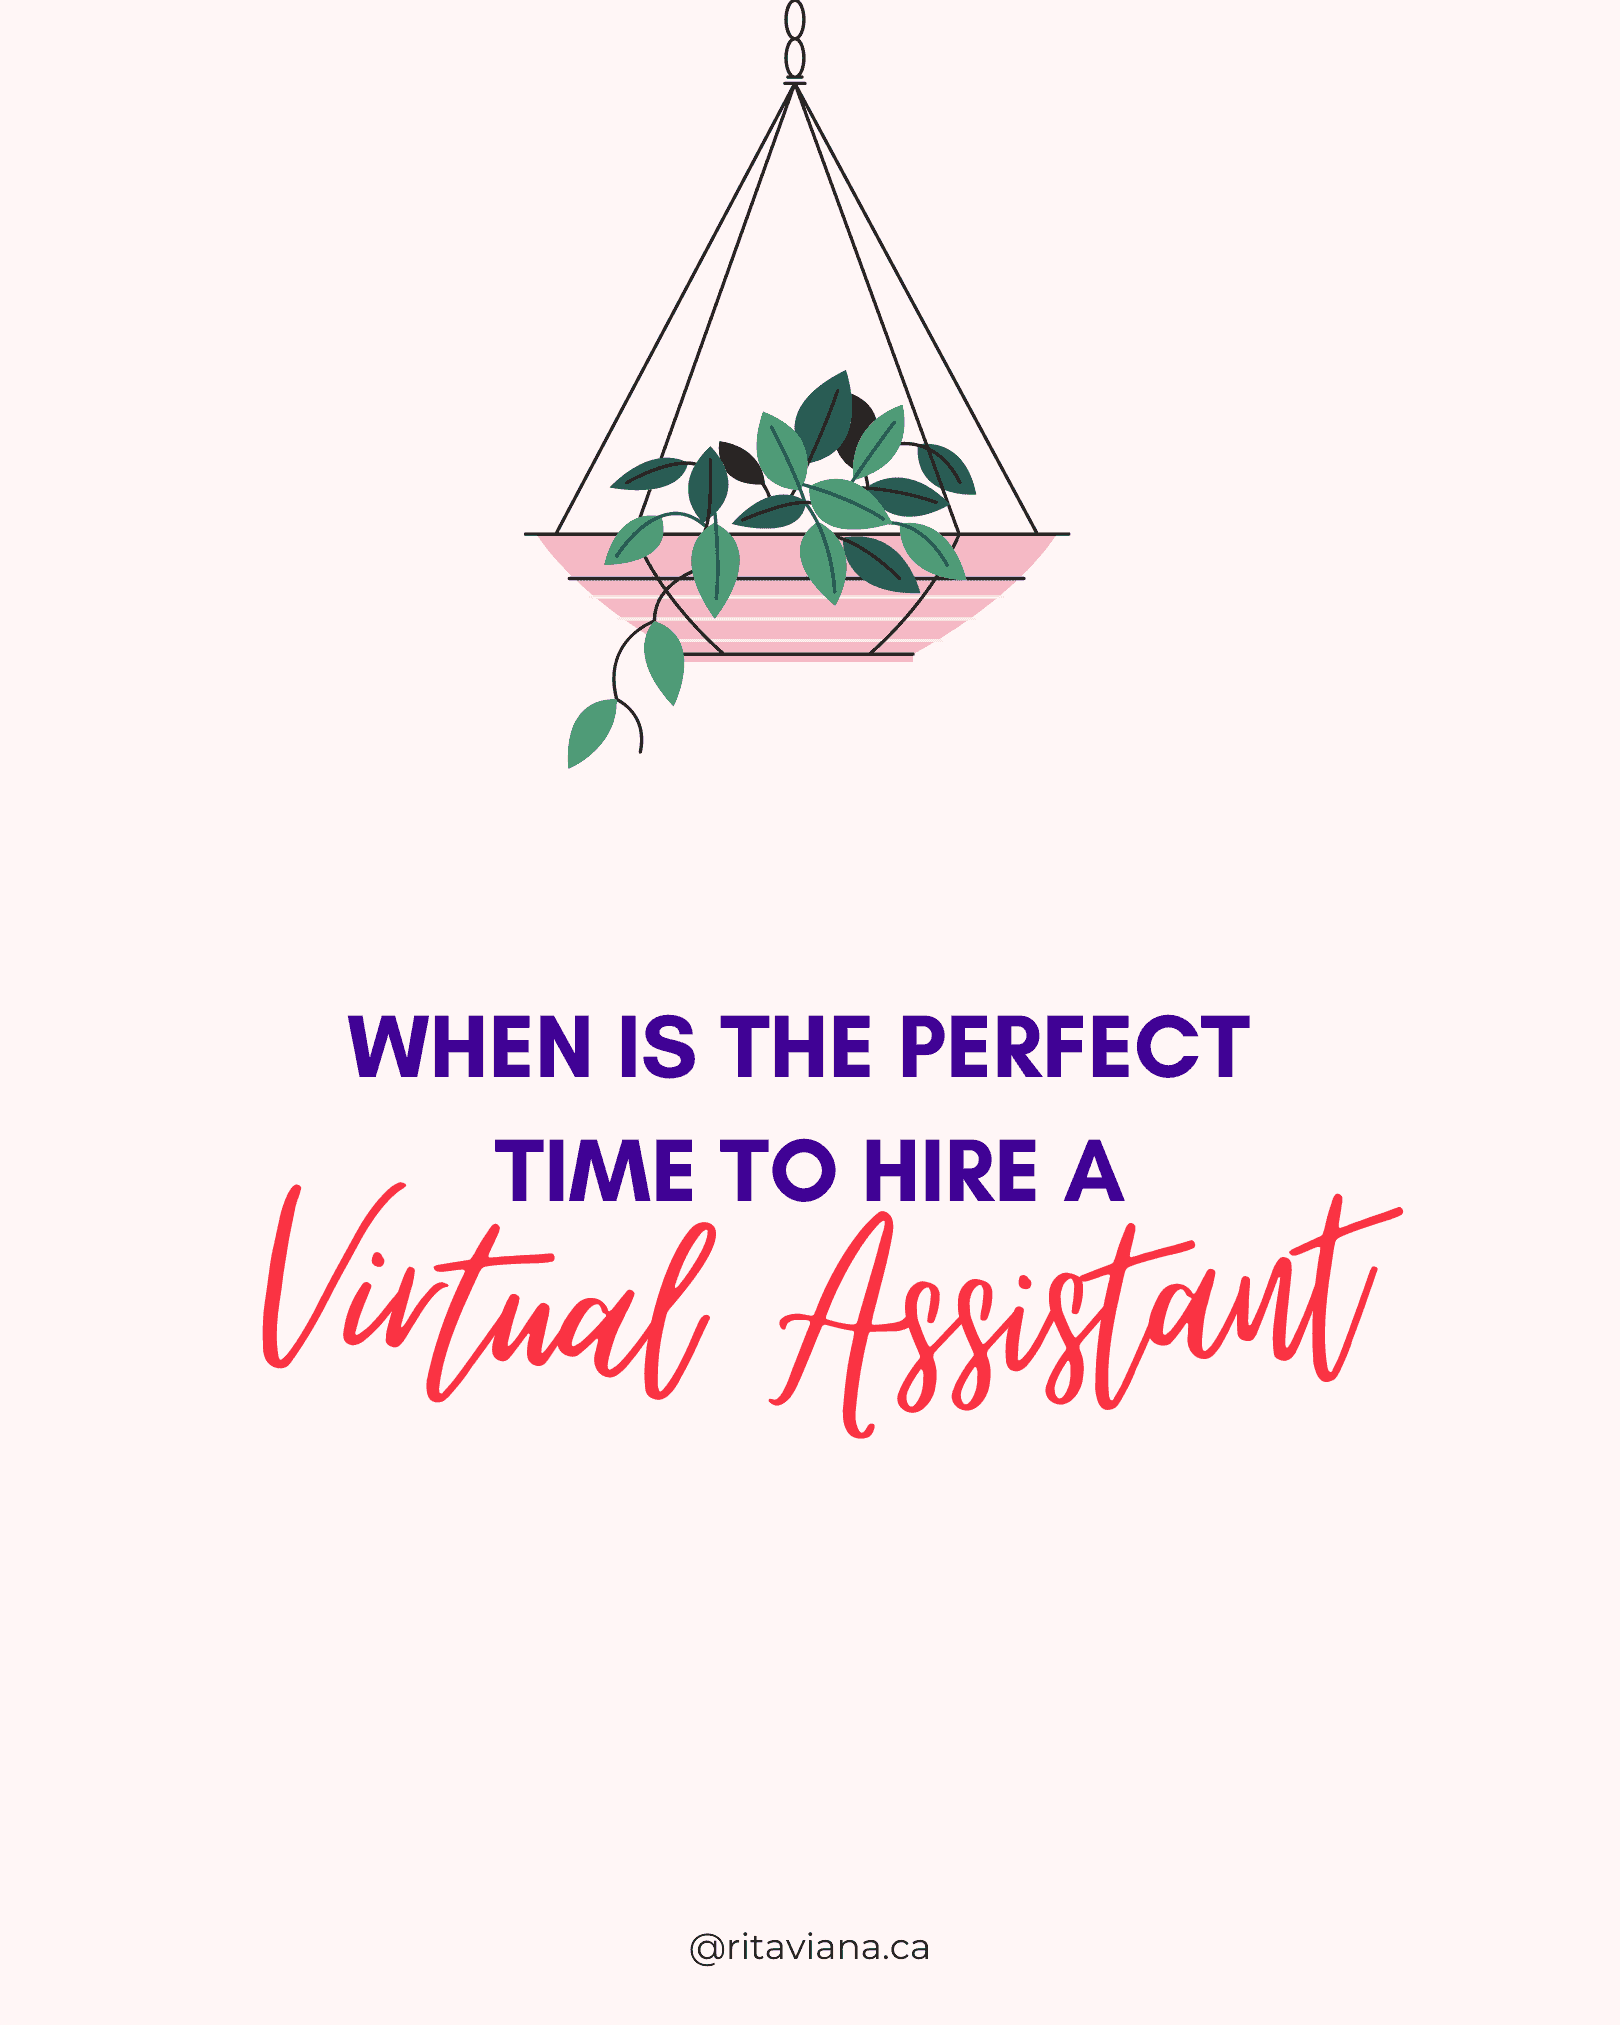 When it's the best time to hire a Virtual Assistant